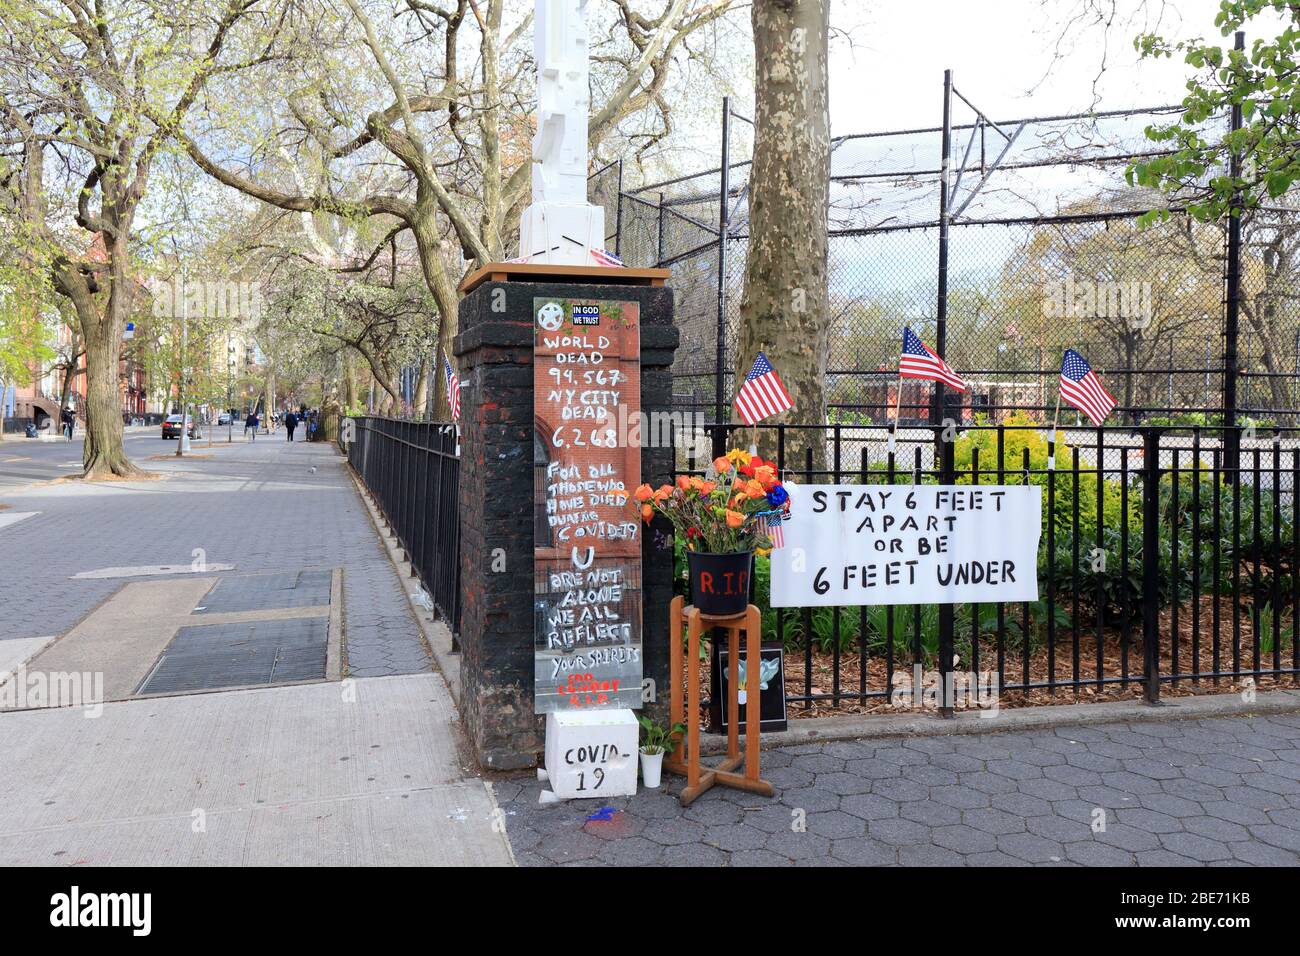 A sidewalk memorial to COVID-19 victims in Tompkins Square Park in Manhattan's East Village in New York during coronavirus. art by Jim Conboy. Stock Photo